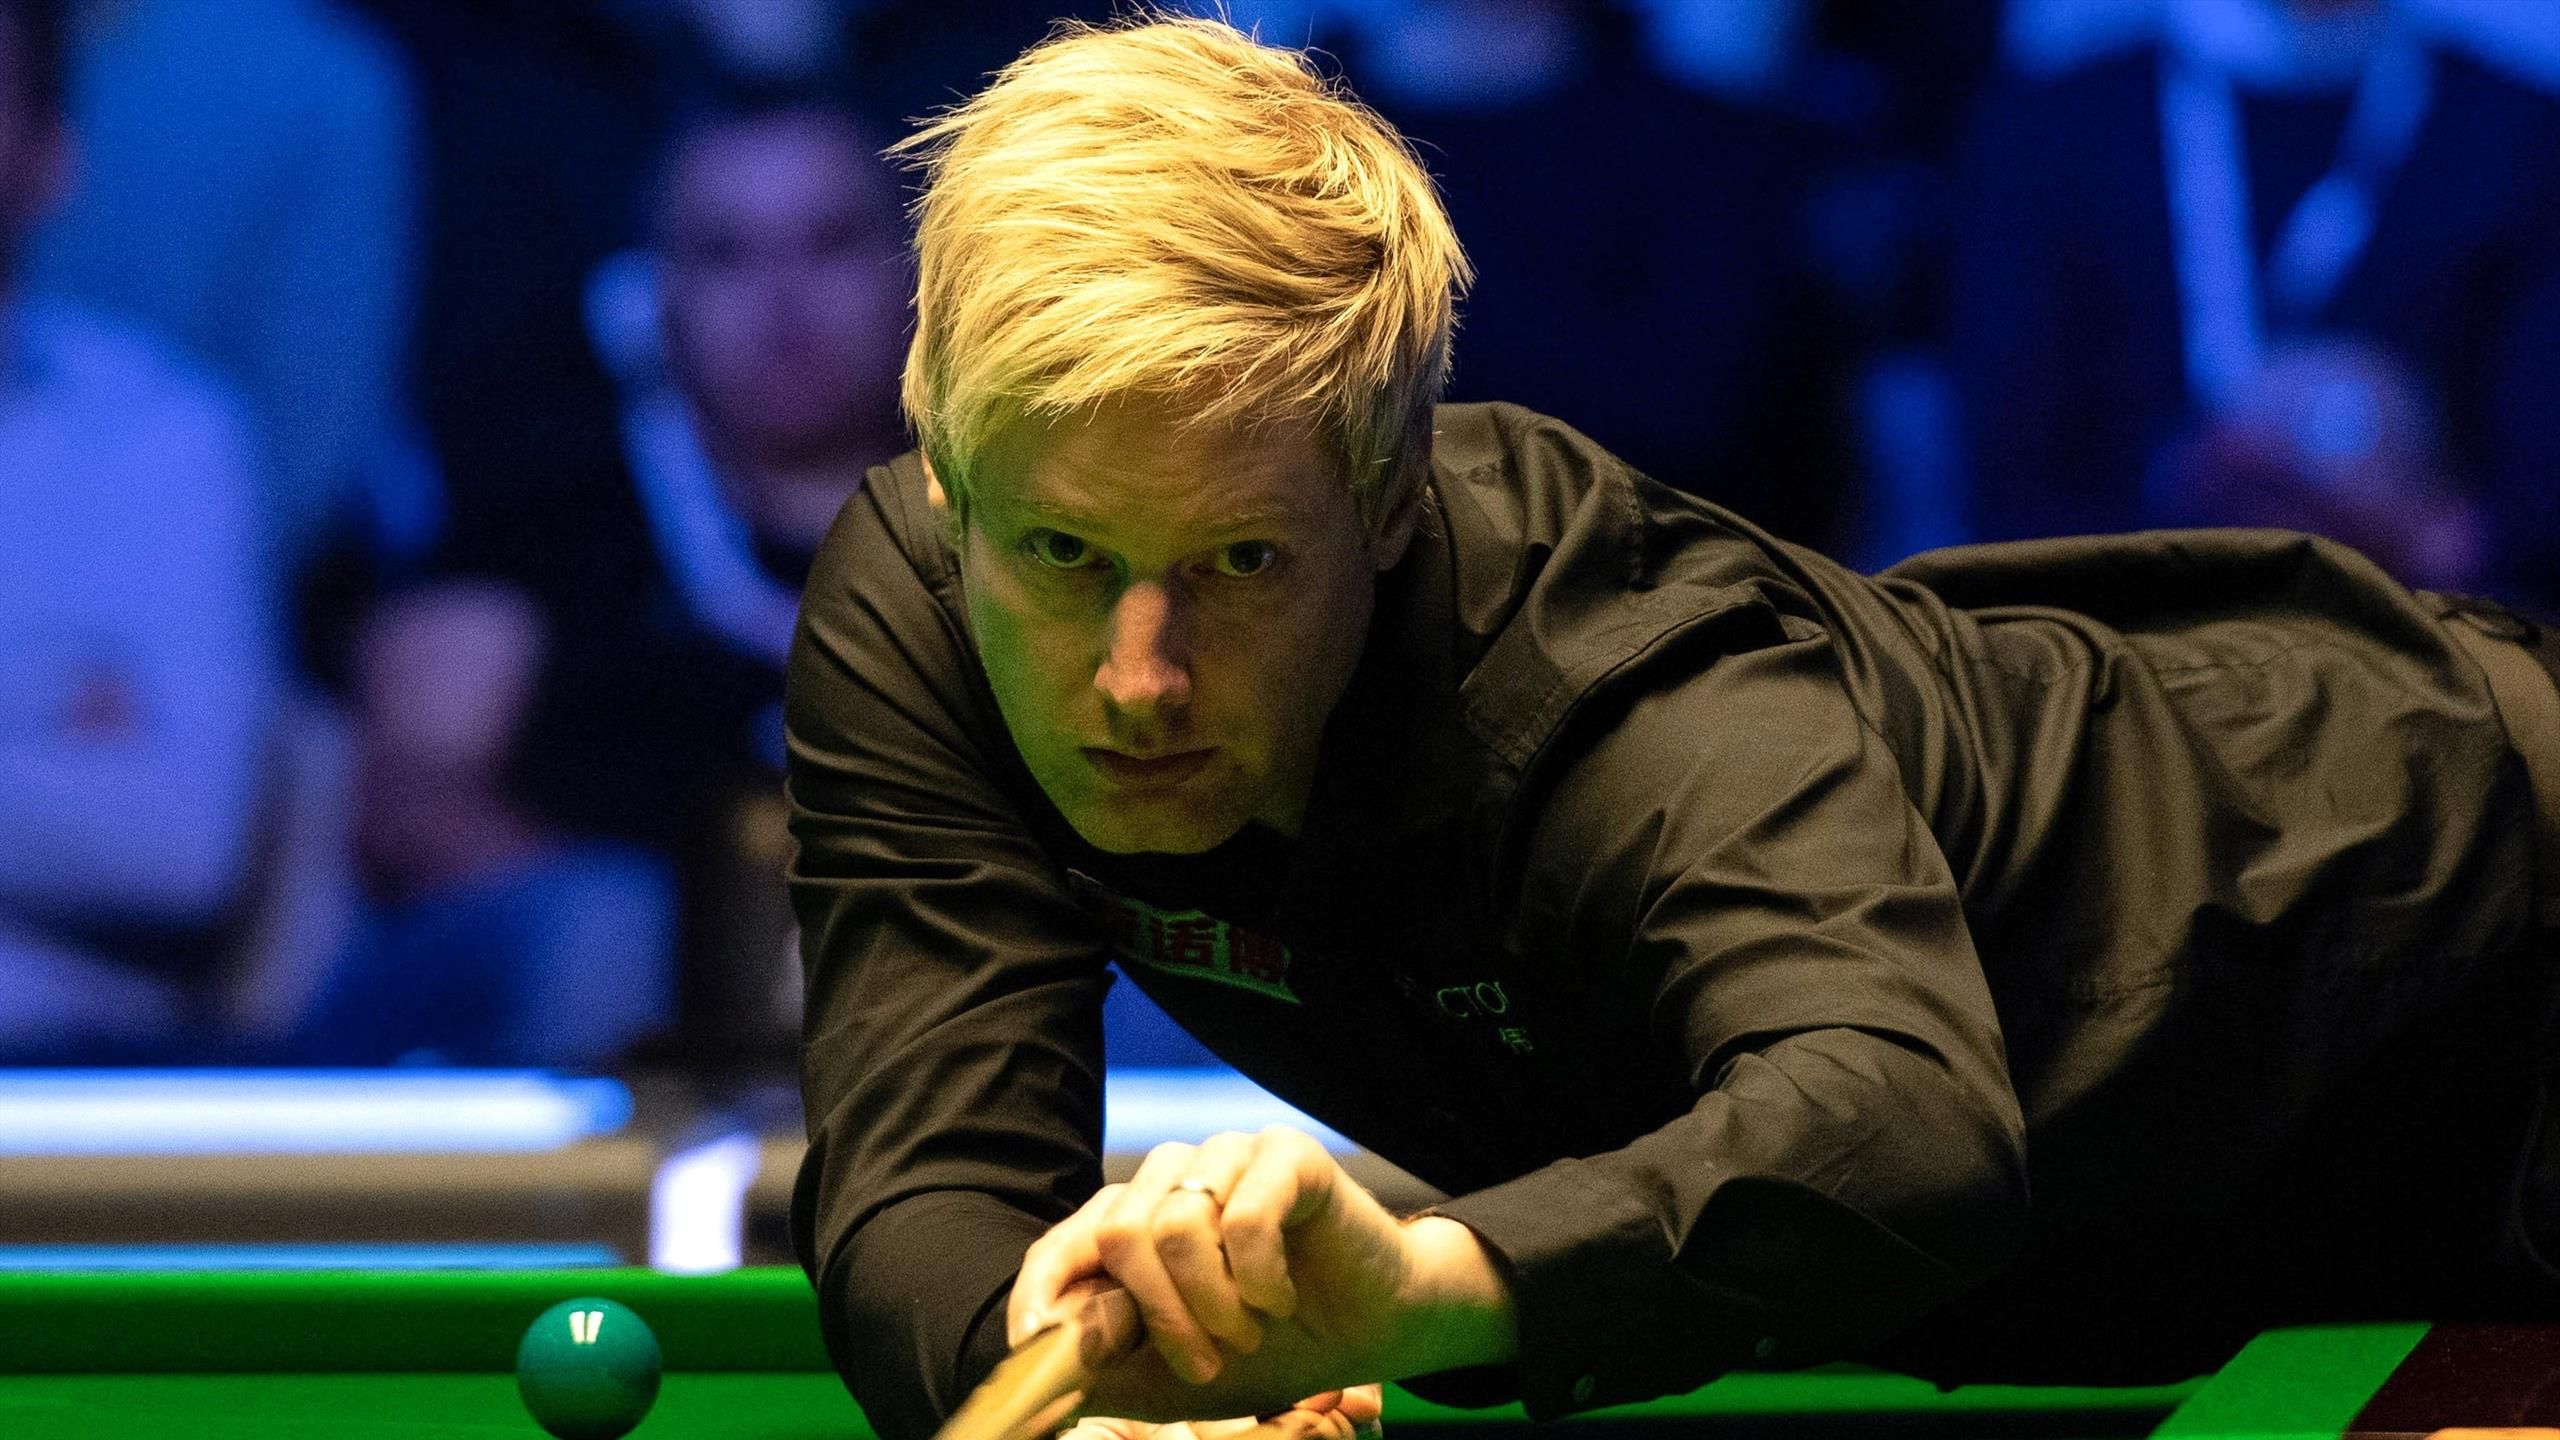 Scottish Open 2022 Joe OConnor stuns Neil Robertson to book place in first final of his career